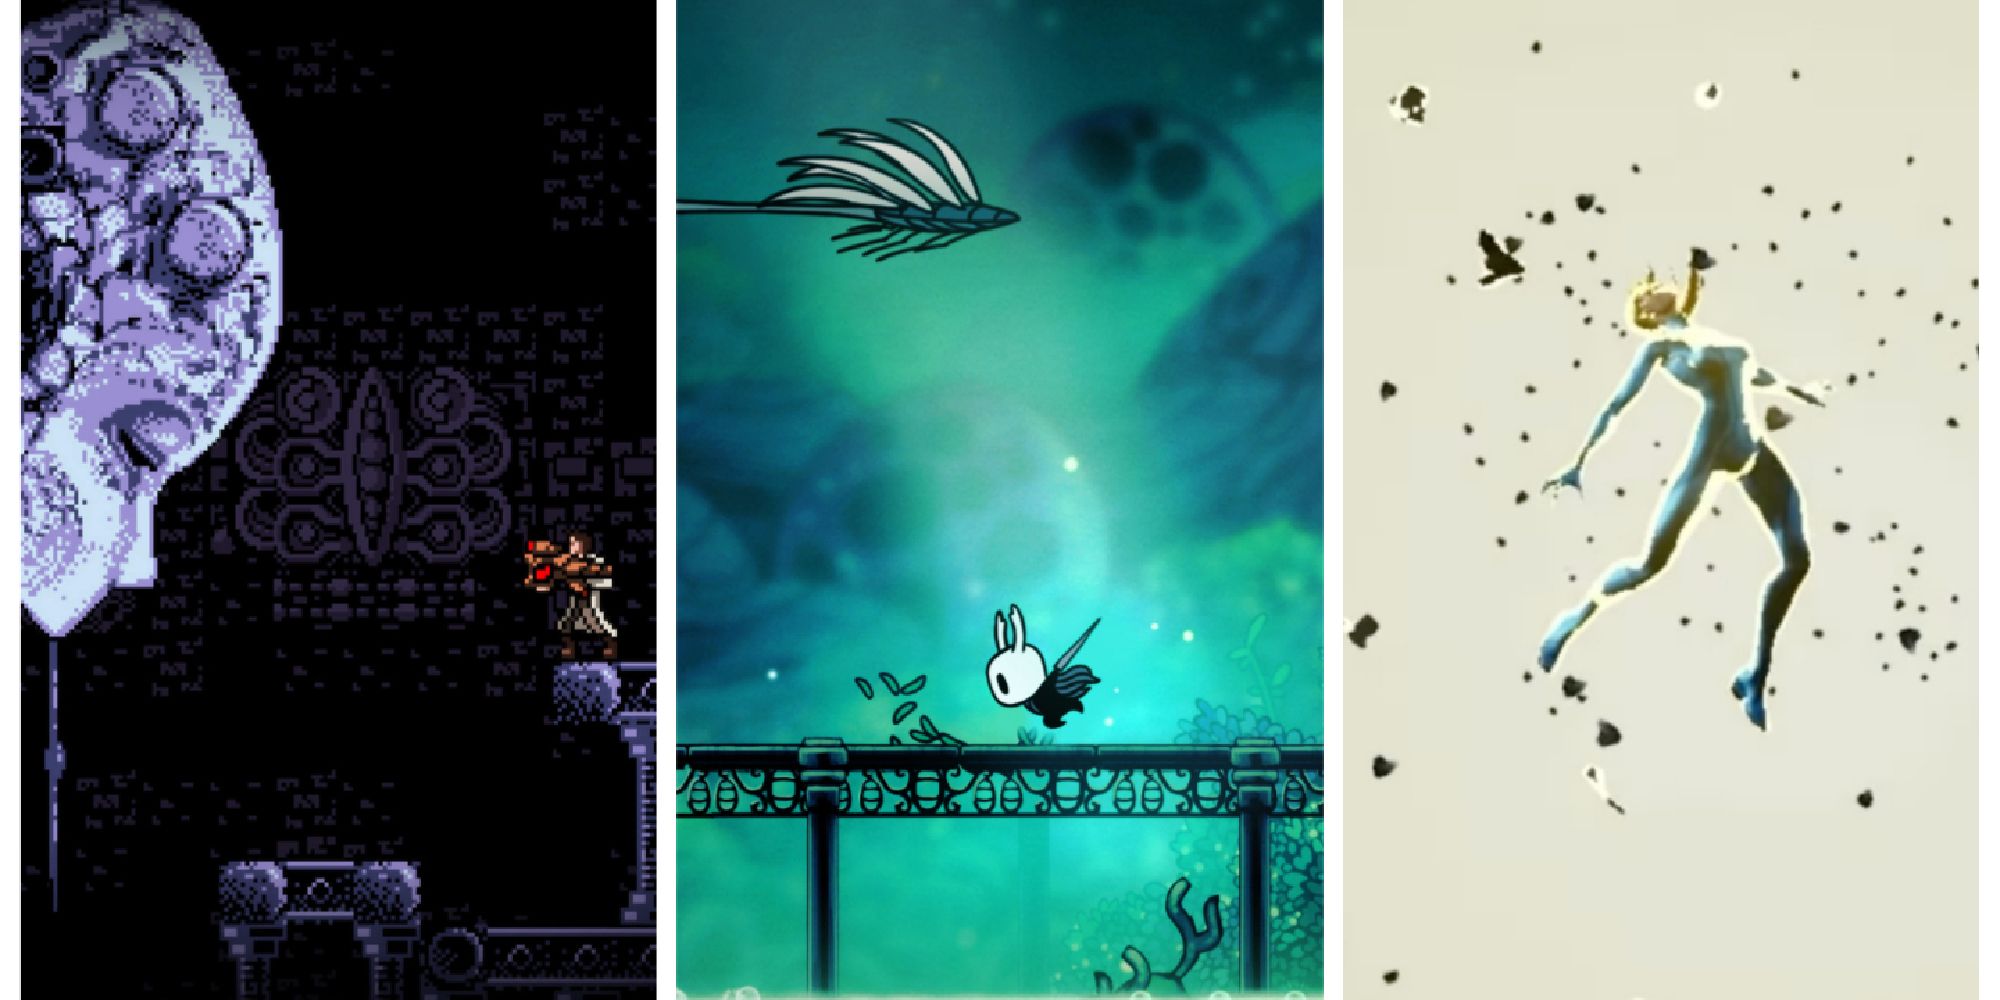 A collage of images from Axiom Verge, Hollow Knight, and Metroid Dread